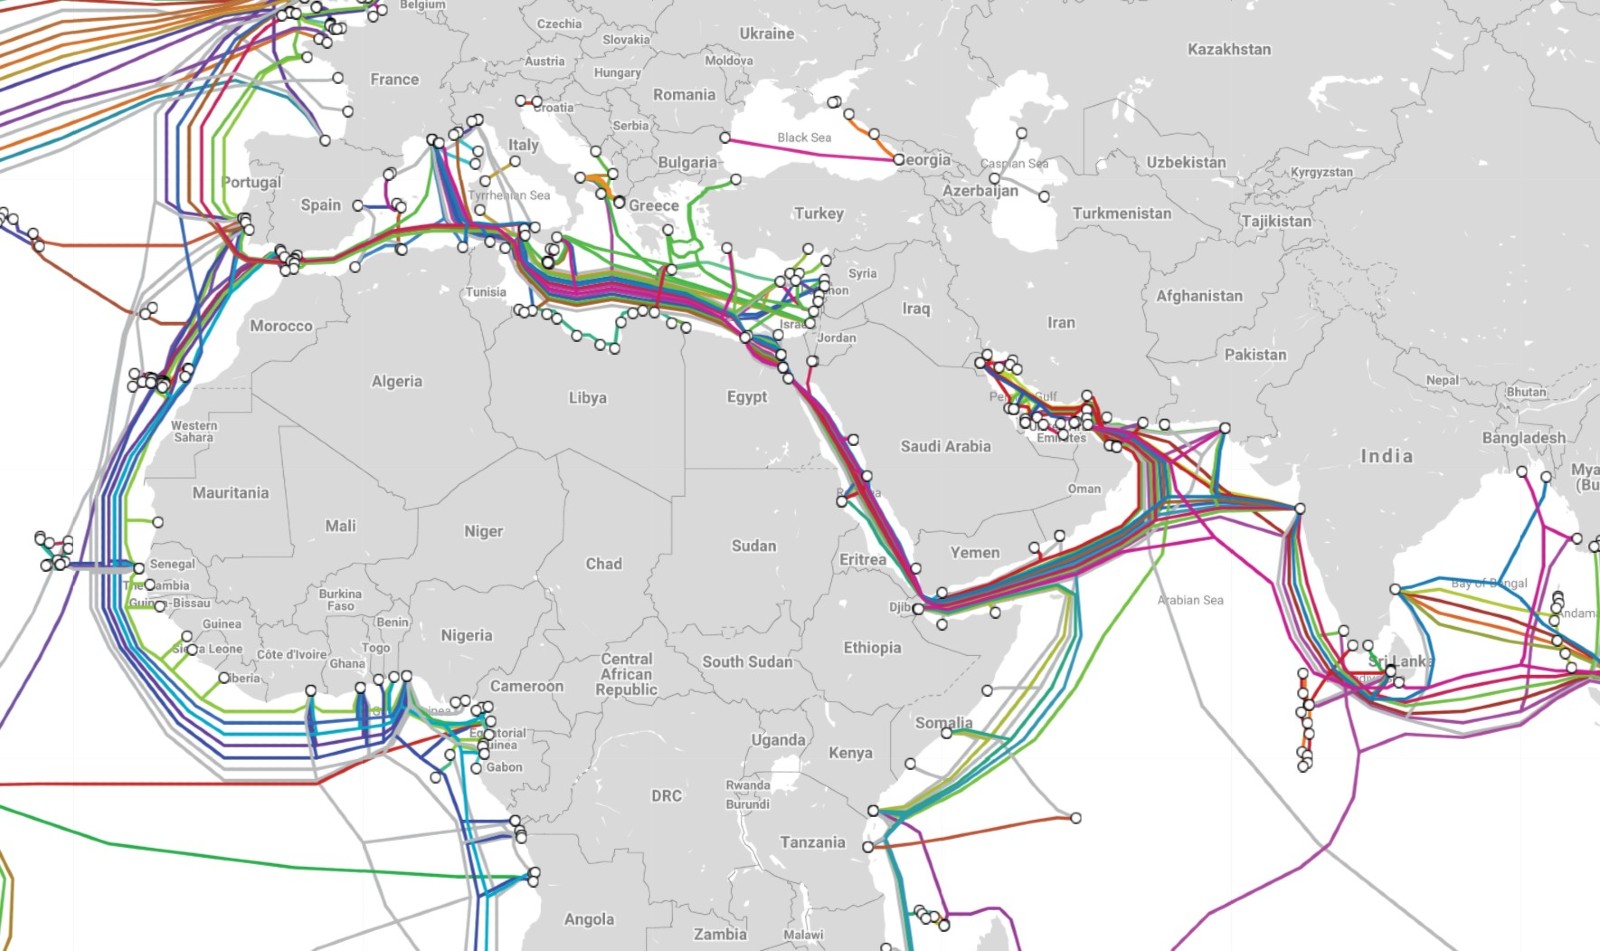 Sub-sea-cables-map-1600px.jpg